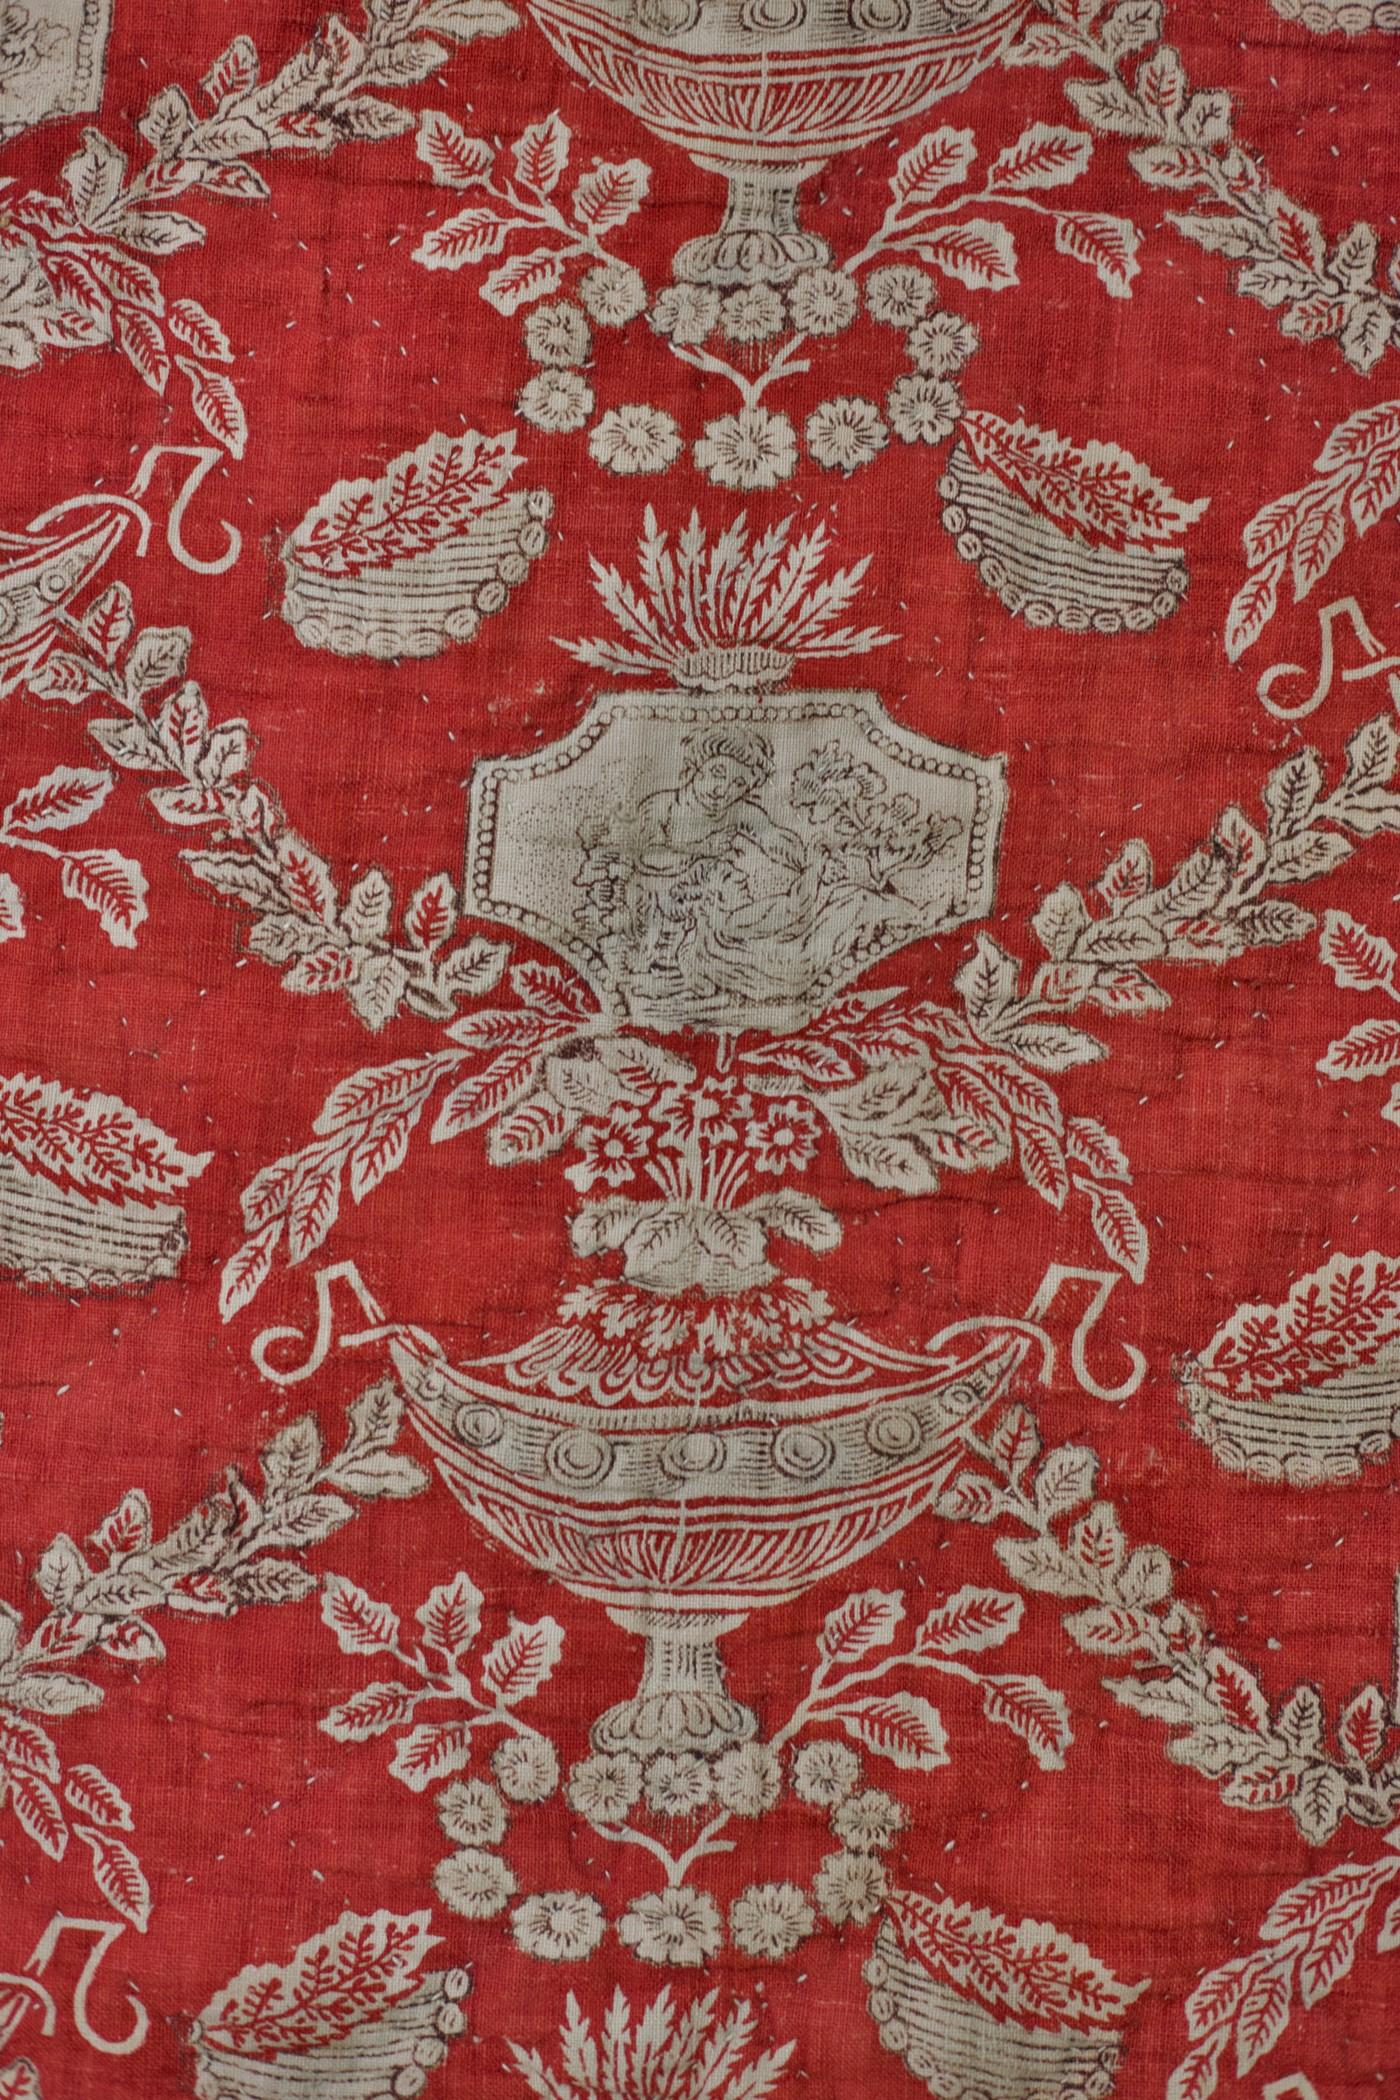 Brown A French Madder Printed Cotton quilt with Neoclassical decor - Circa 1785/1800